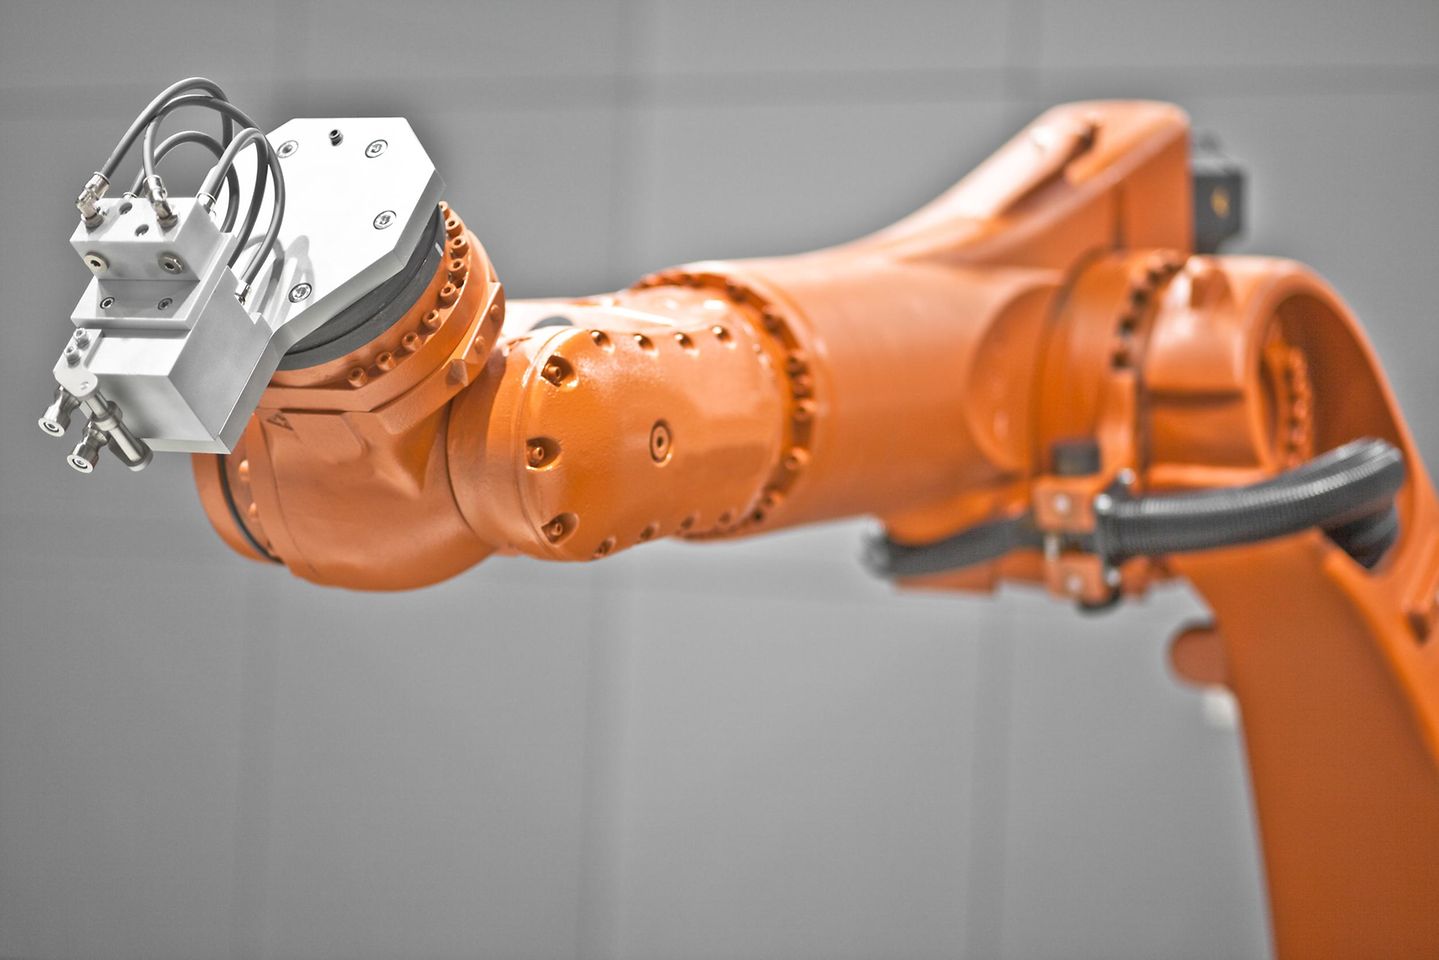 Some robot manufacturers now use innovative assembly solutions that enable them to combine dissimilar materials – even incorporating new substrates